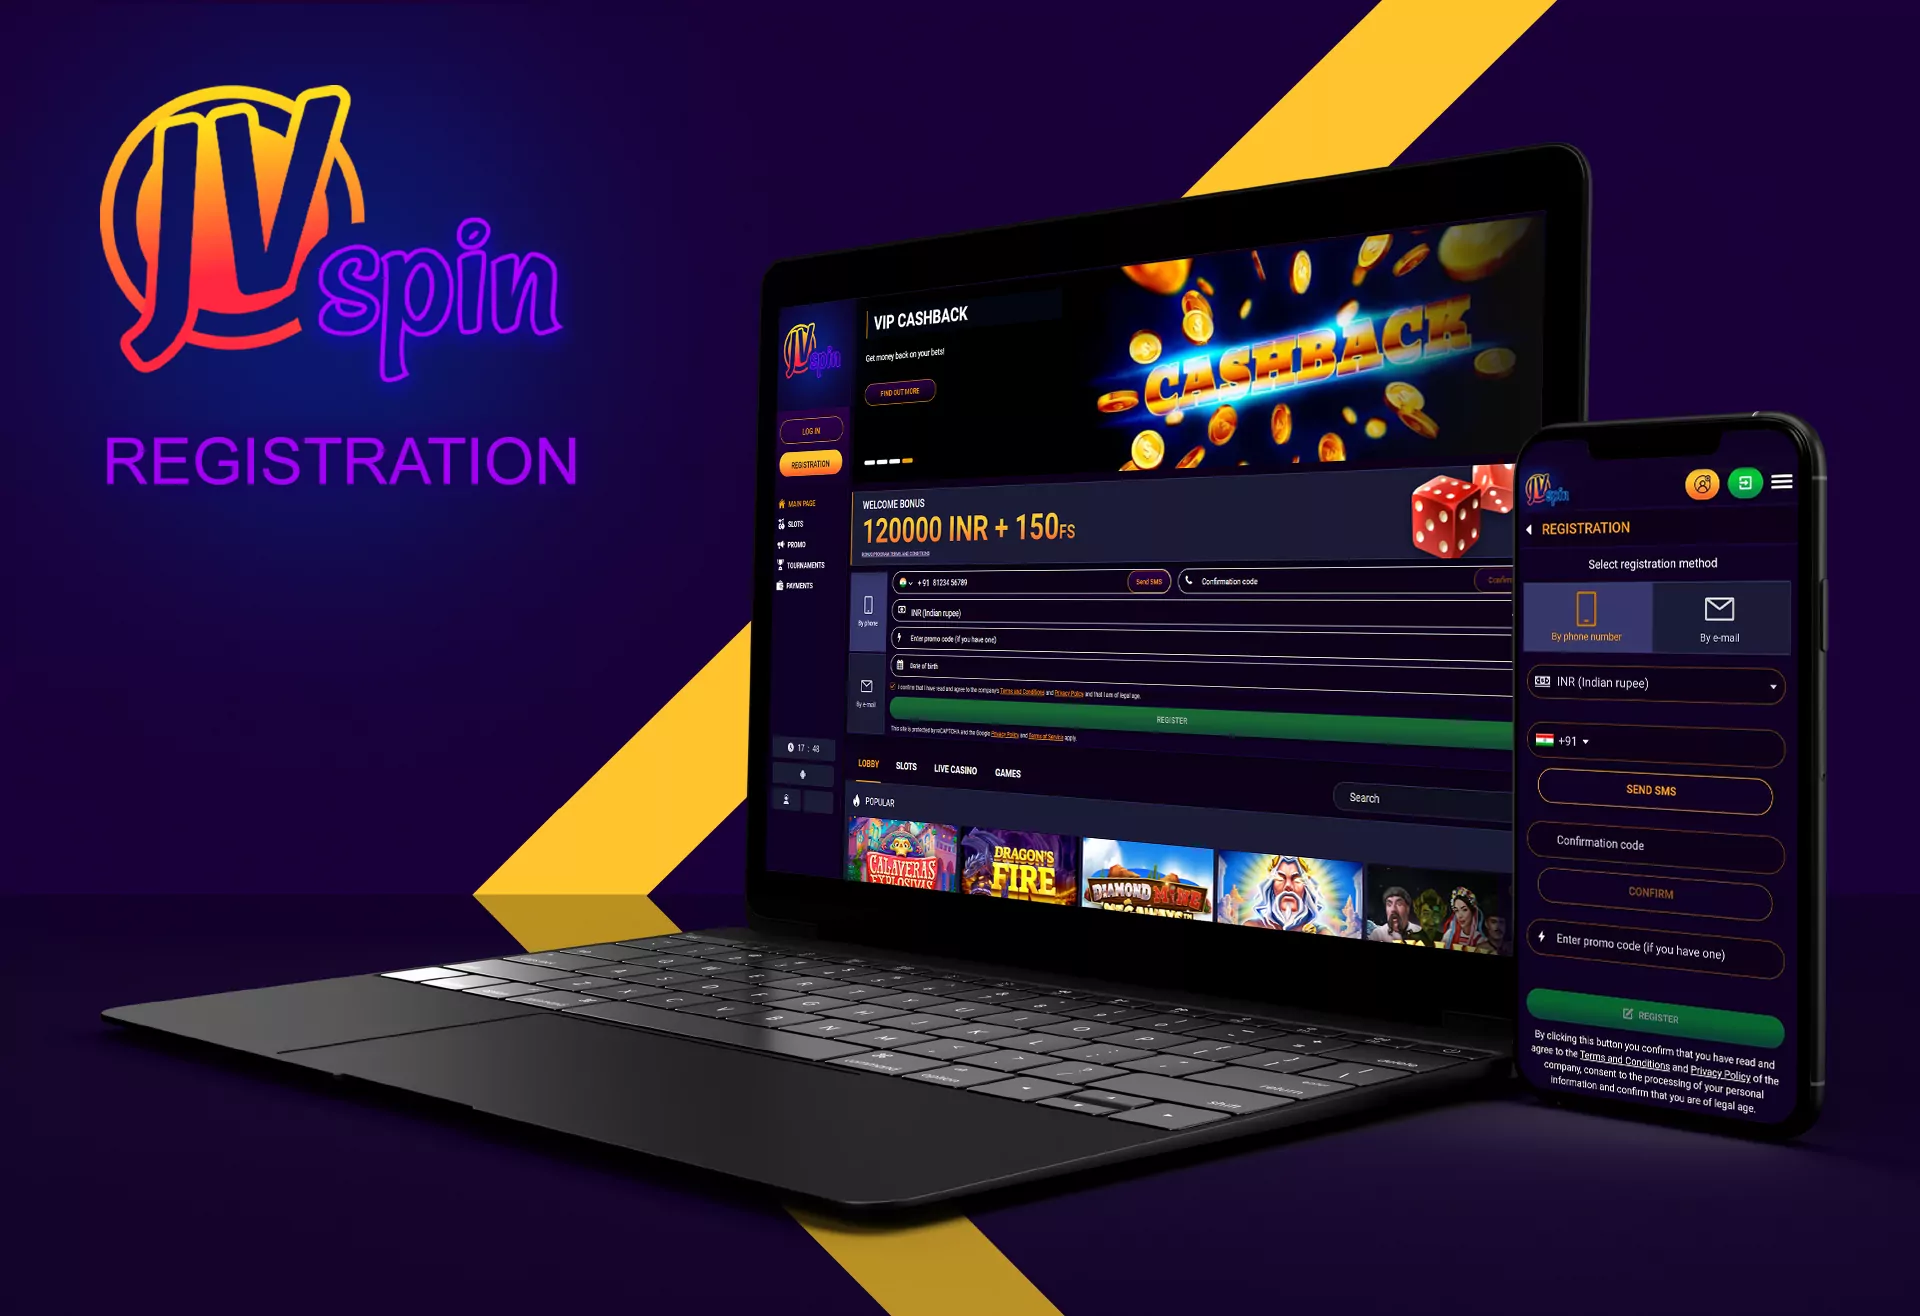 To play games, you have to create a new account on the JVSpin Casino.